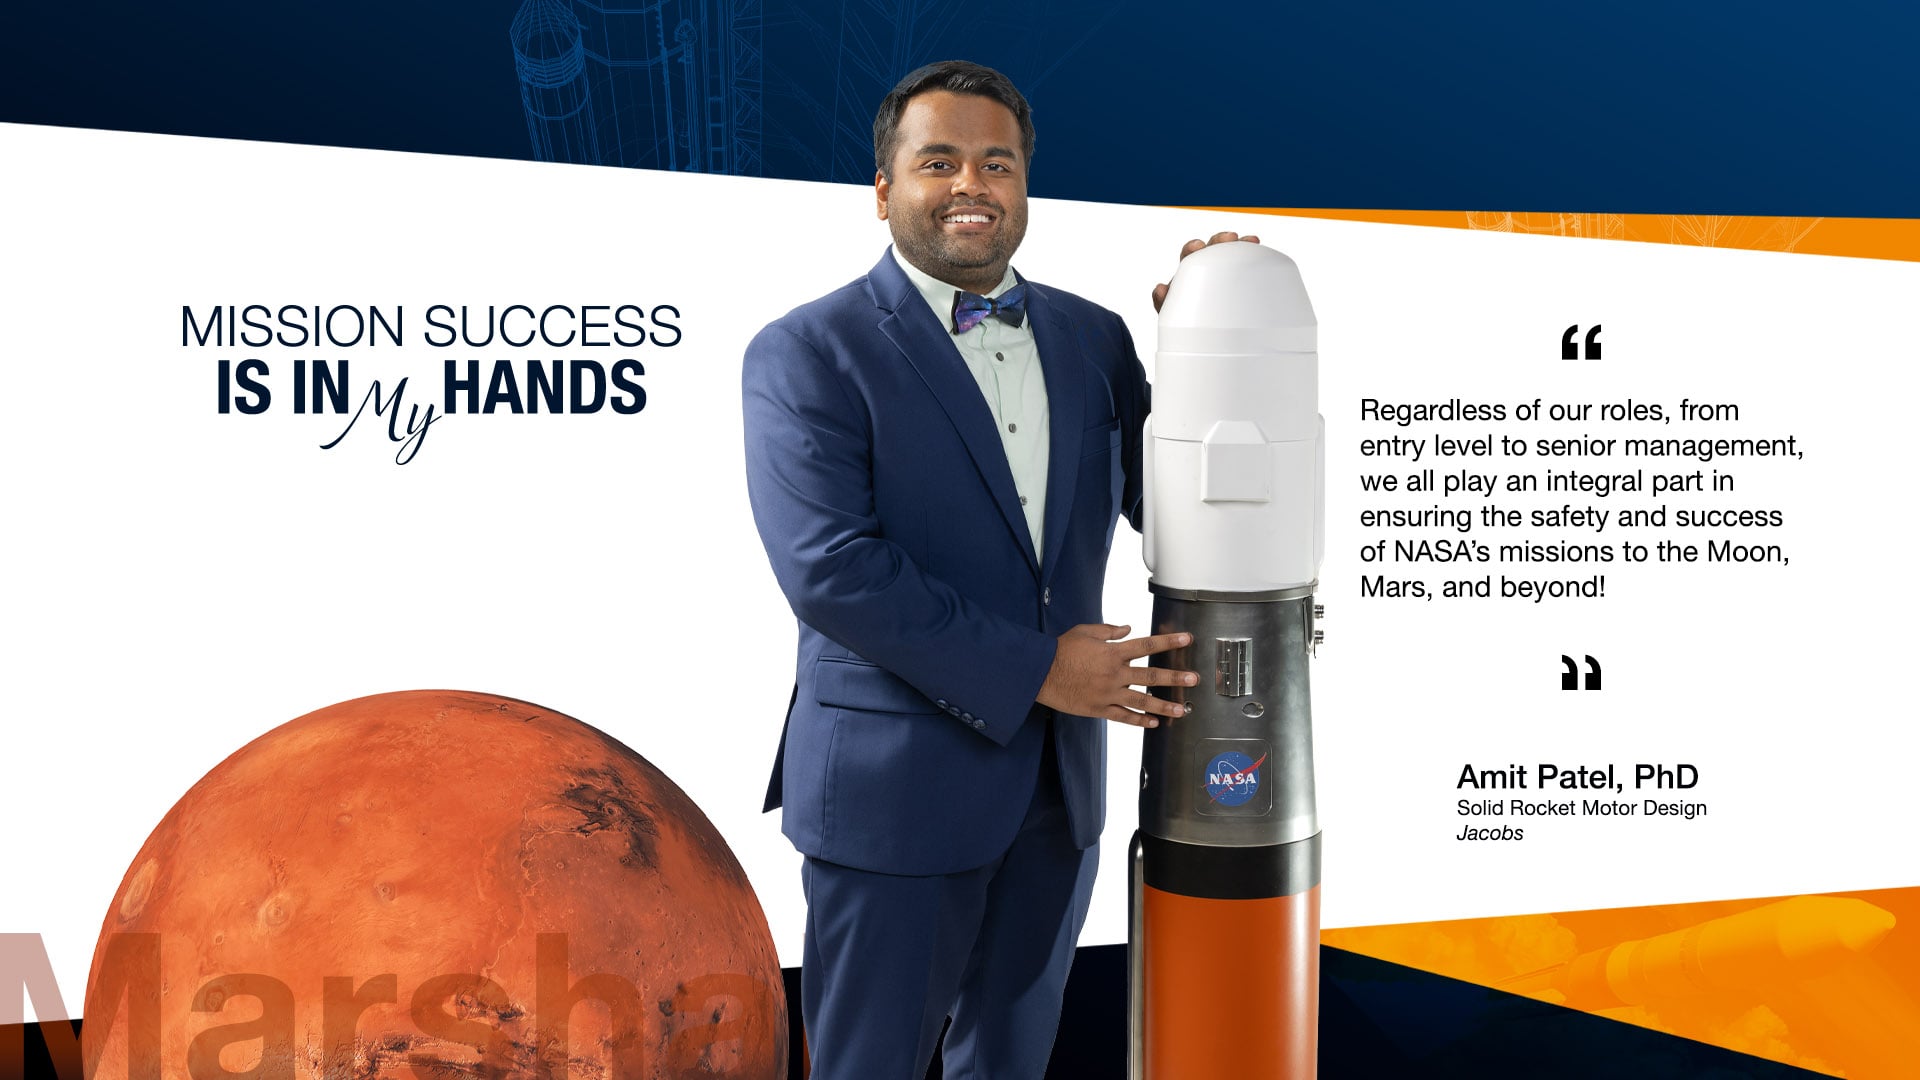 Amit Patel is a Jacobs Space Exploration Group solid rocket motor design engineer supporting NASA’s Marshall Space Flight Center.